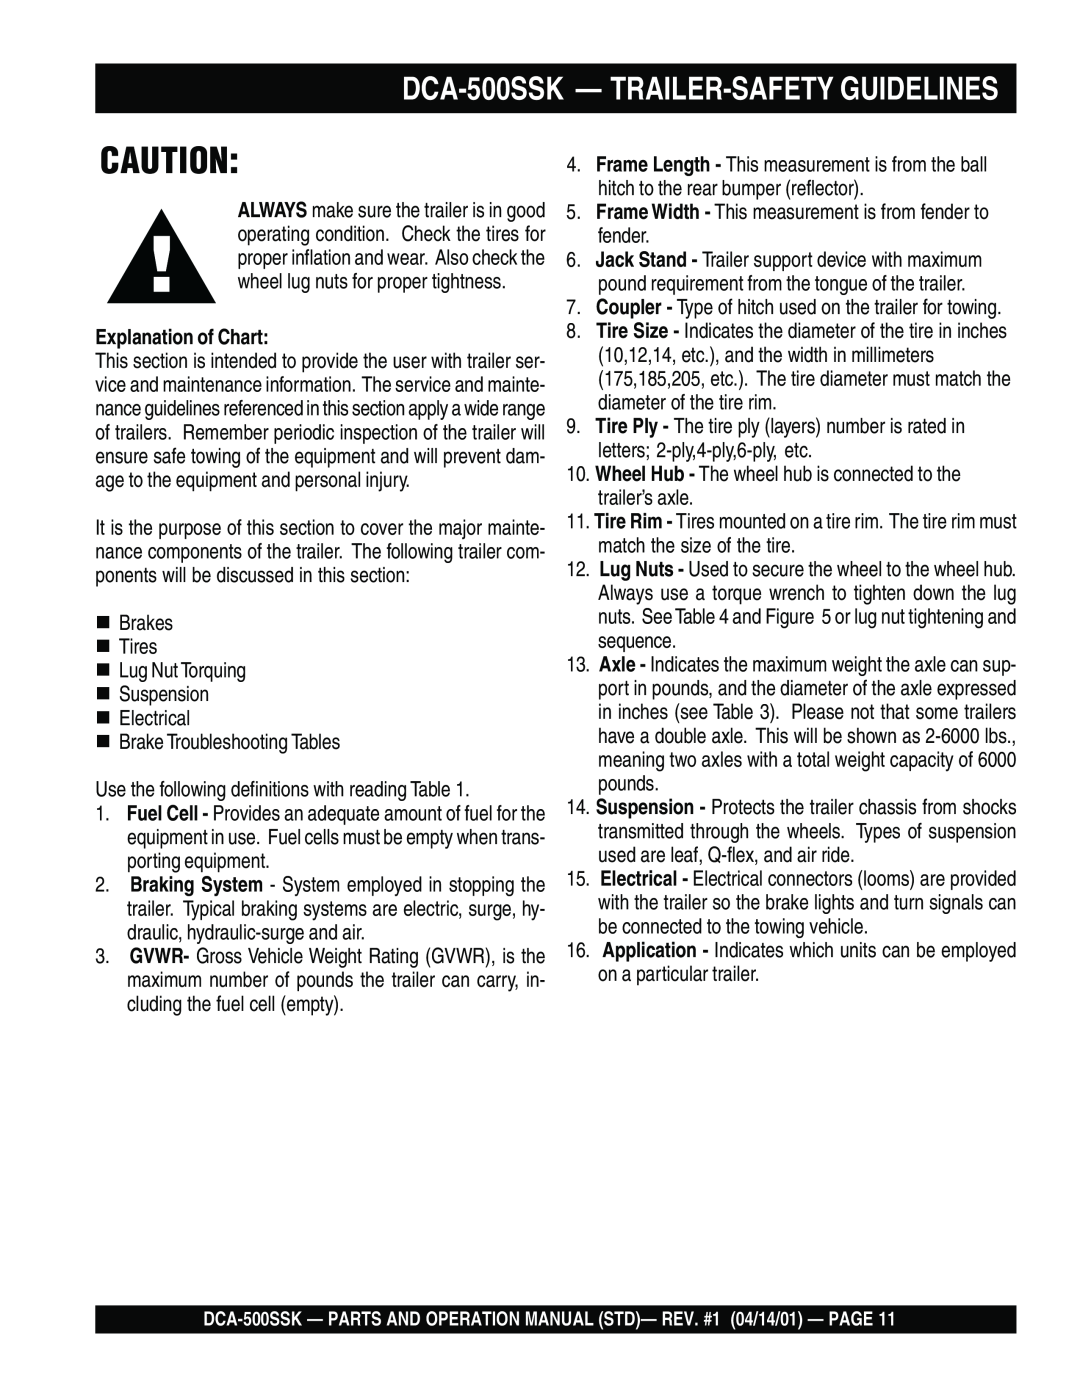 Multiquip operation manual DCA-500SSK - TRAILER-SAFETY GUIDELINES, Explanation of Chart 